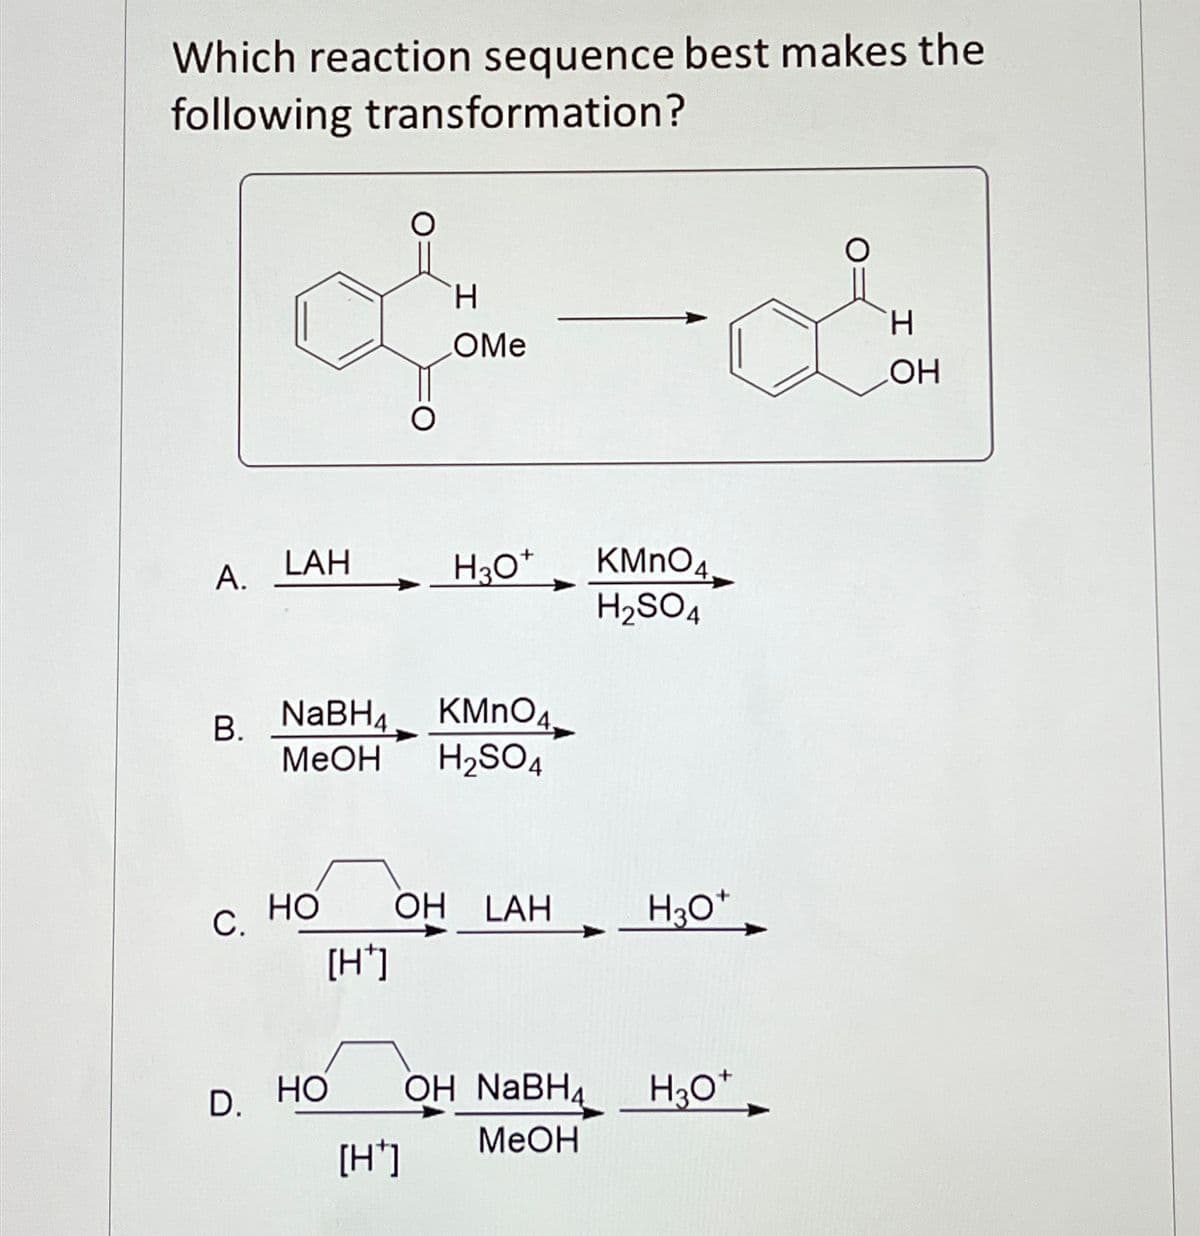 Which reaction sequence best makes the
following transformation?
H
H
OMe
OH
LAH
A.
H3O+
KMnO4
H2SO4
B.
NaBH4 KMnO4
MeOH
H2SO4
C.
HO OH LAH
H3O+
[H+]
D.
HO OH NaBH4
H3O+
MeOH
[H]